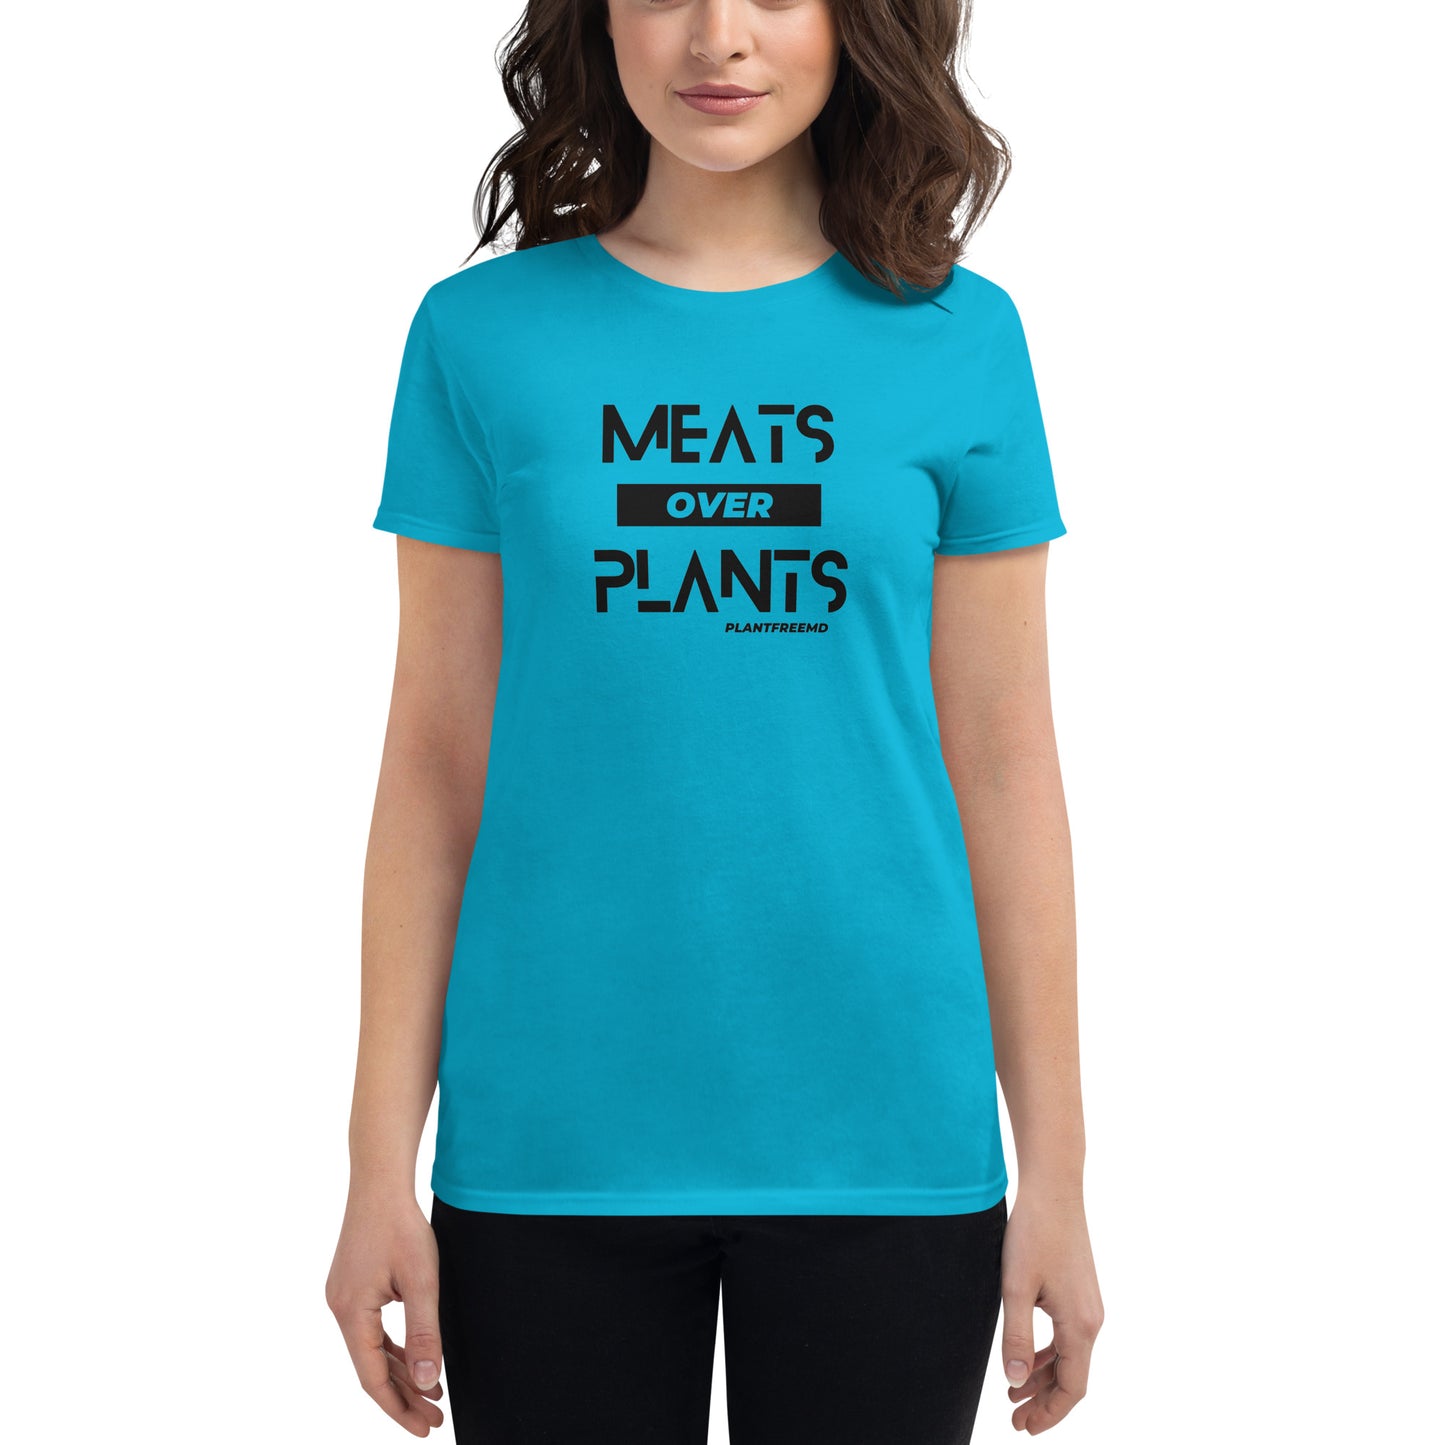 Meats Over Plants Women's Fitted T-shirt Dark